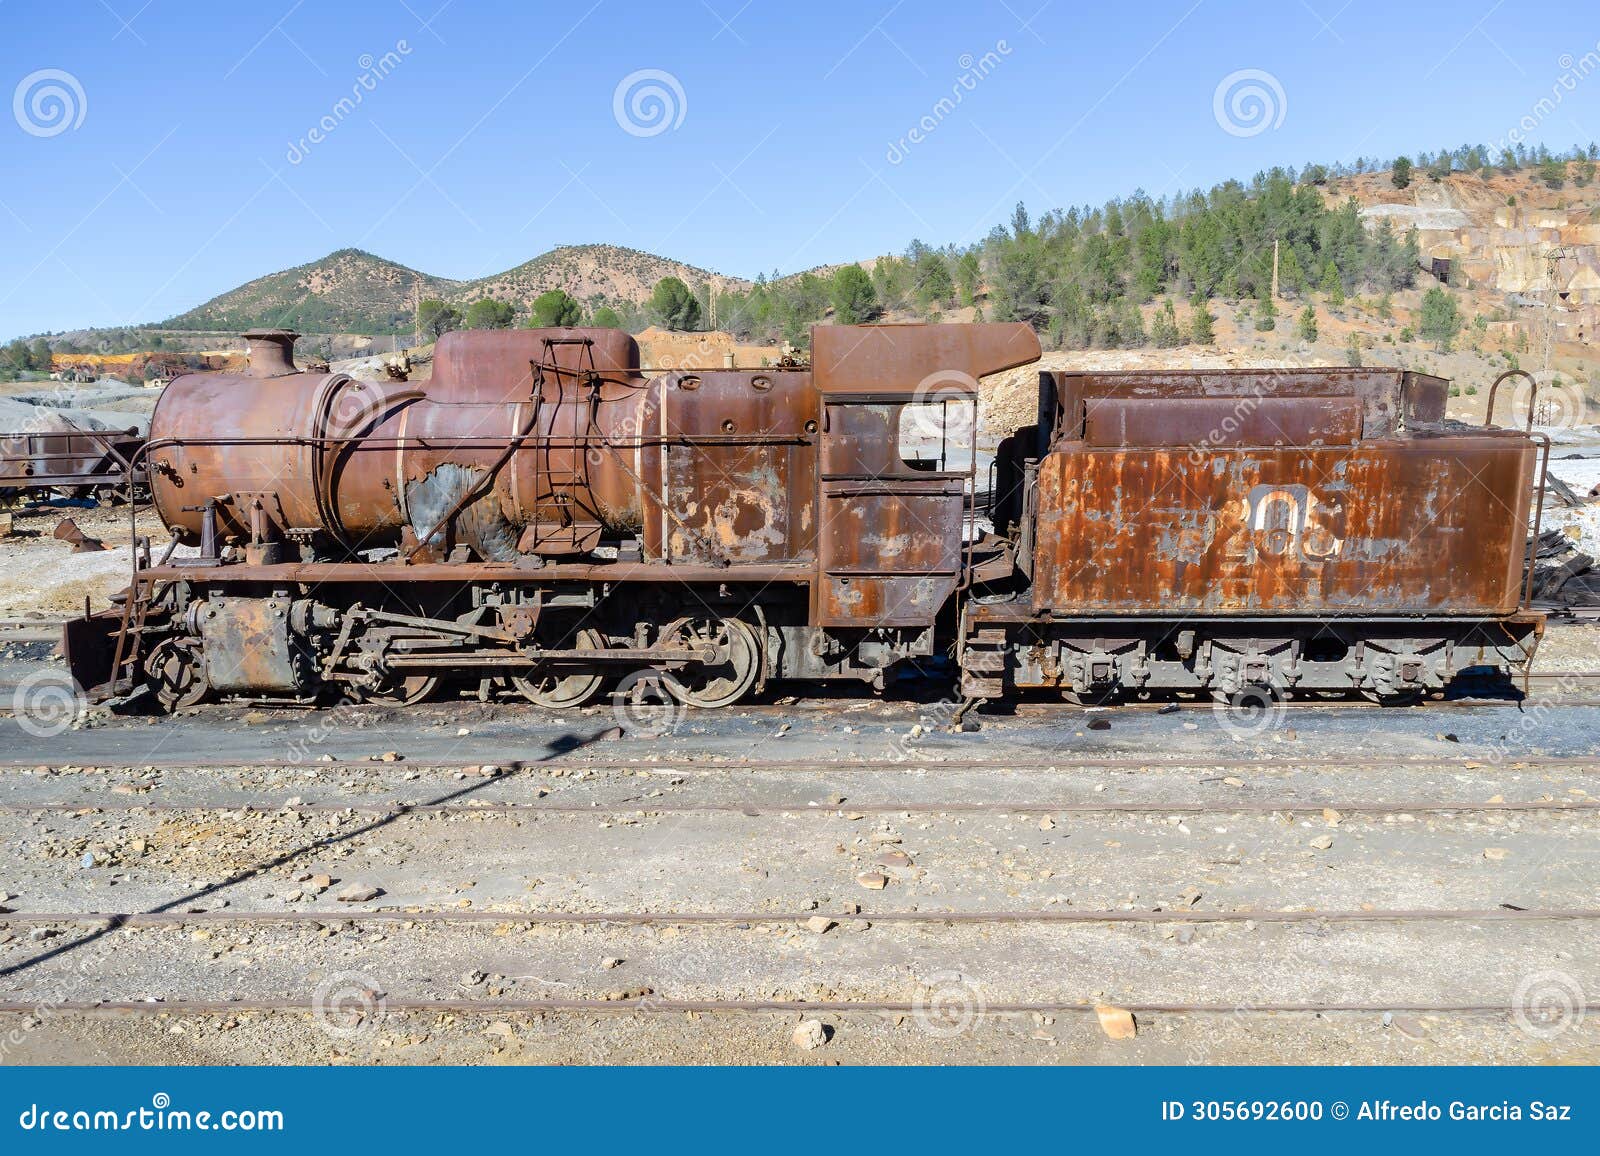 old and rusty steam mining train used for transportation of the copper of corta atalaya mining